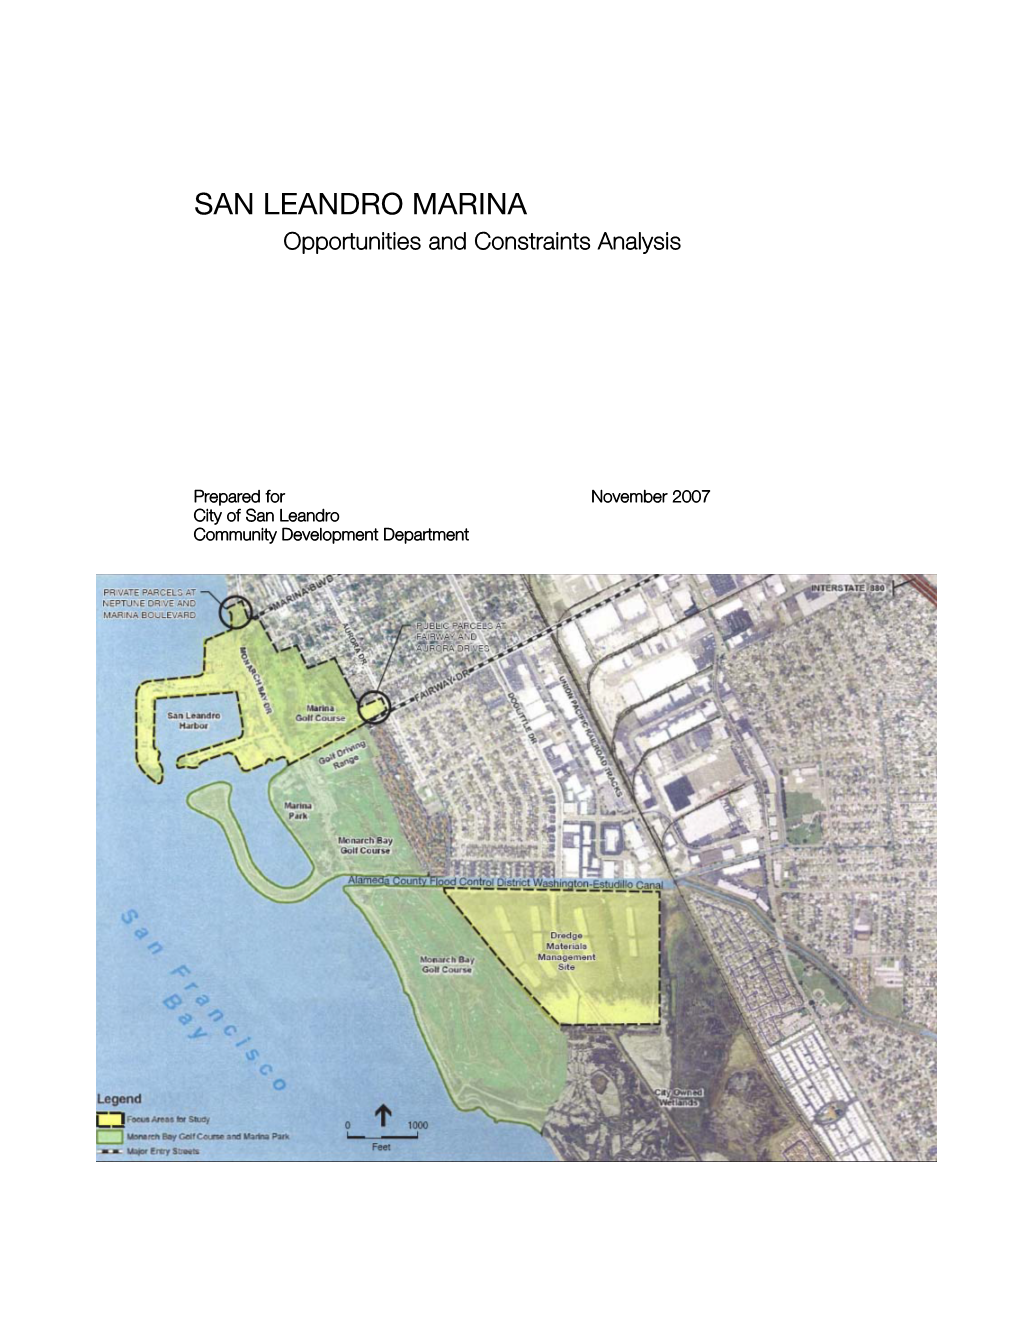 SAN LEANDRO MARINA Opportunities and Constraints Analysis